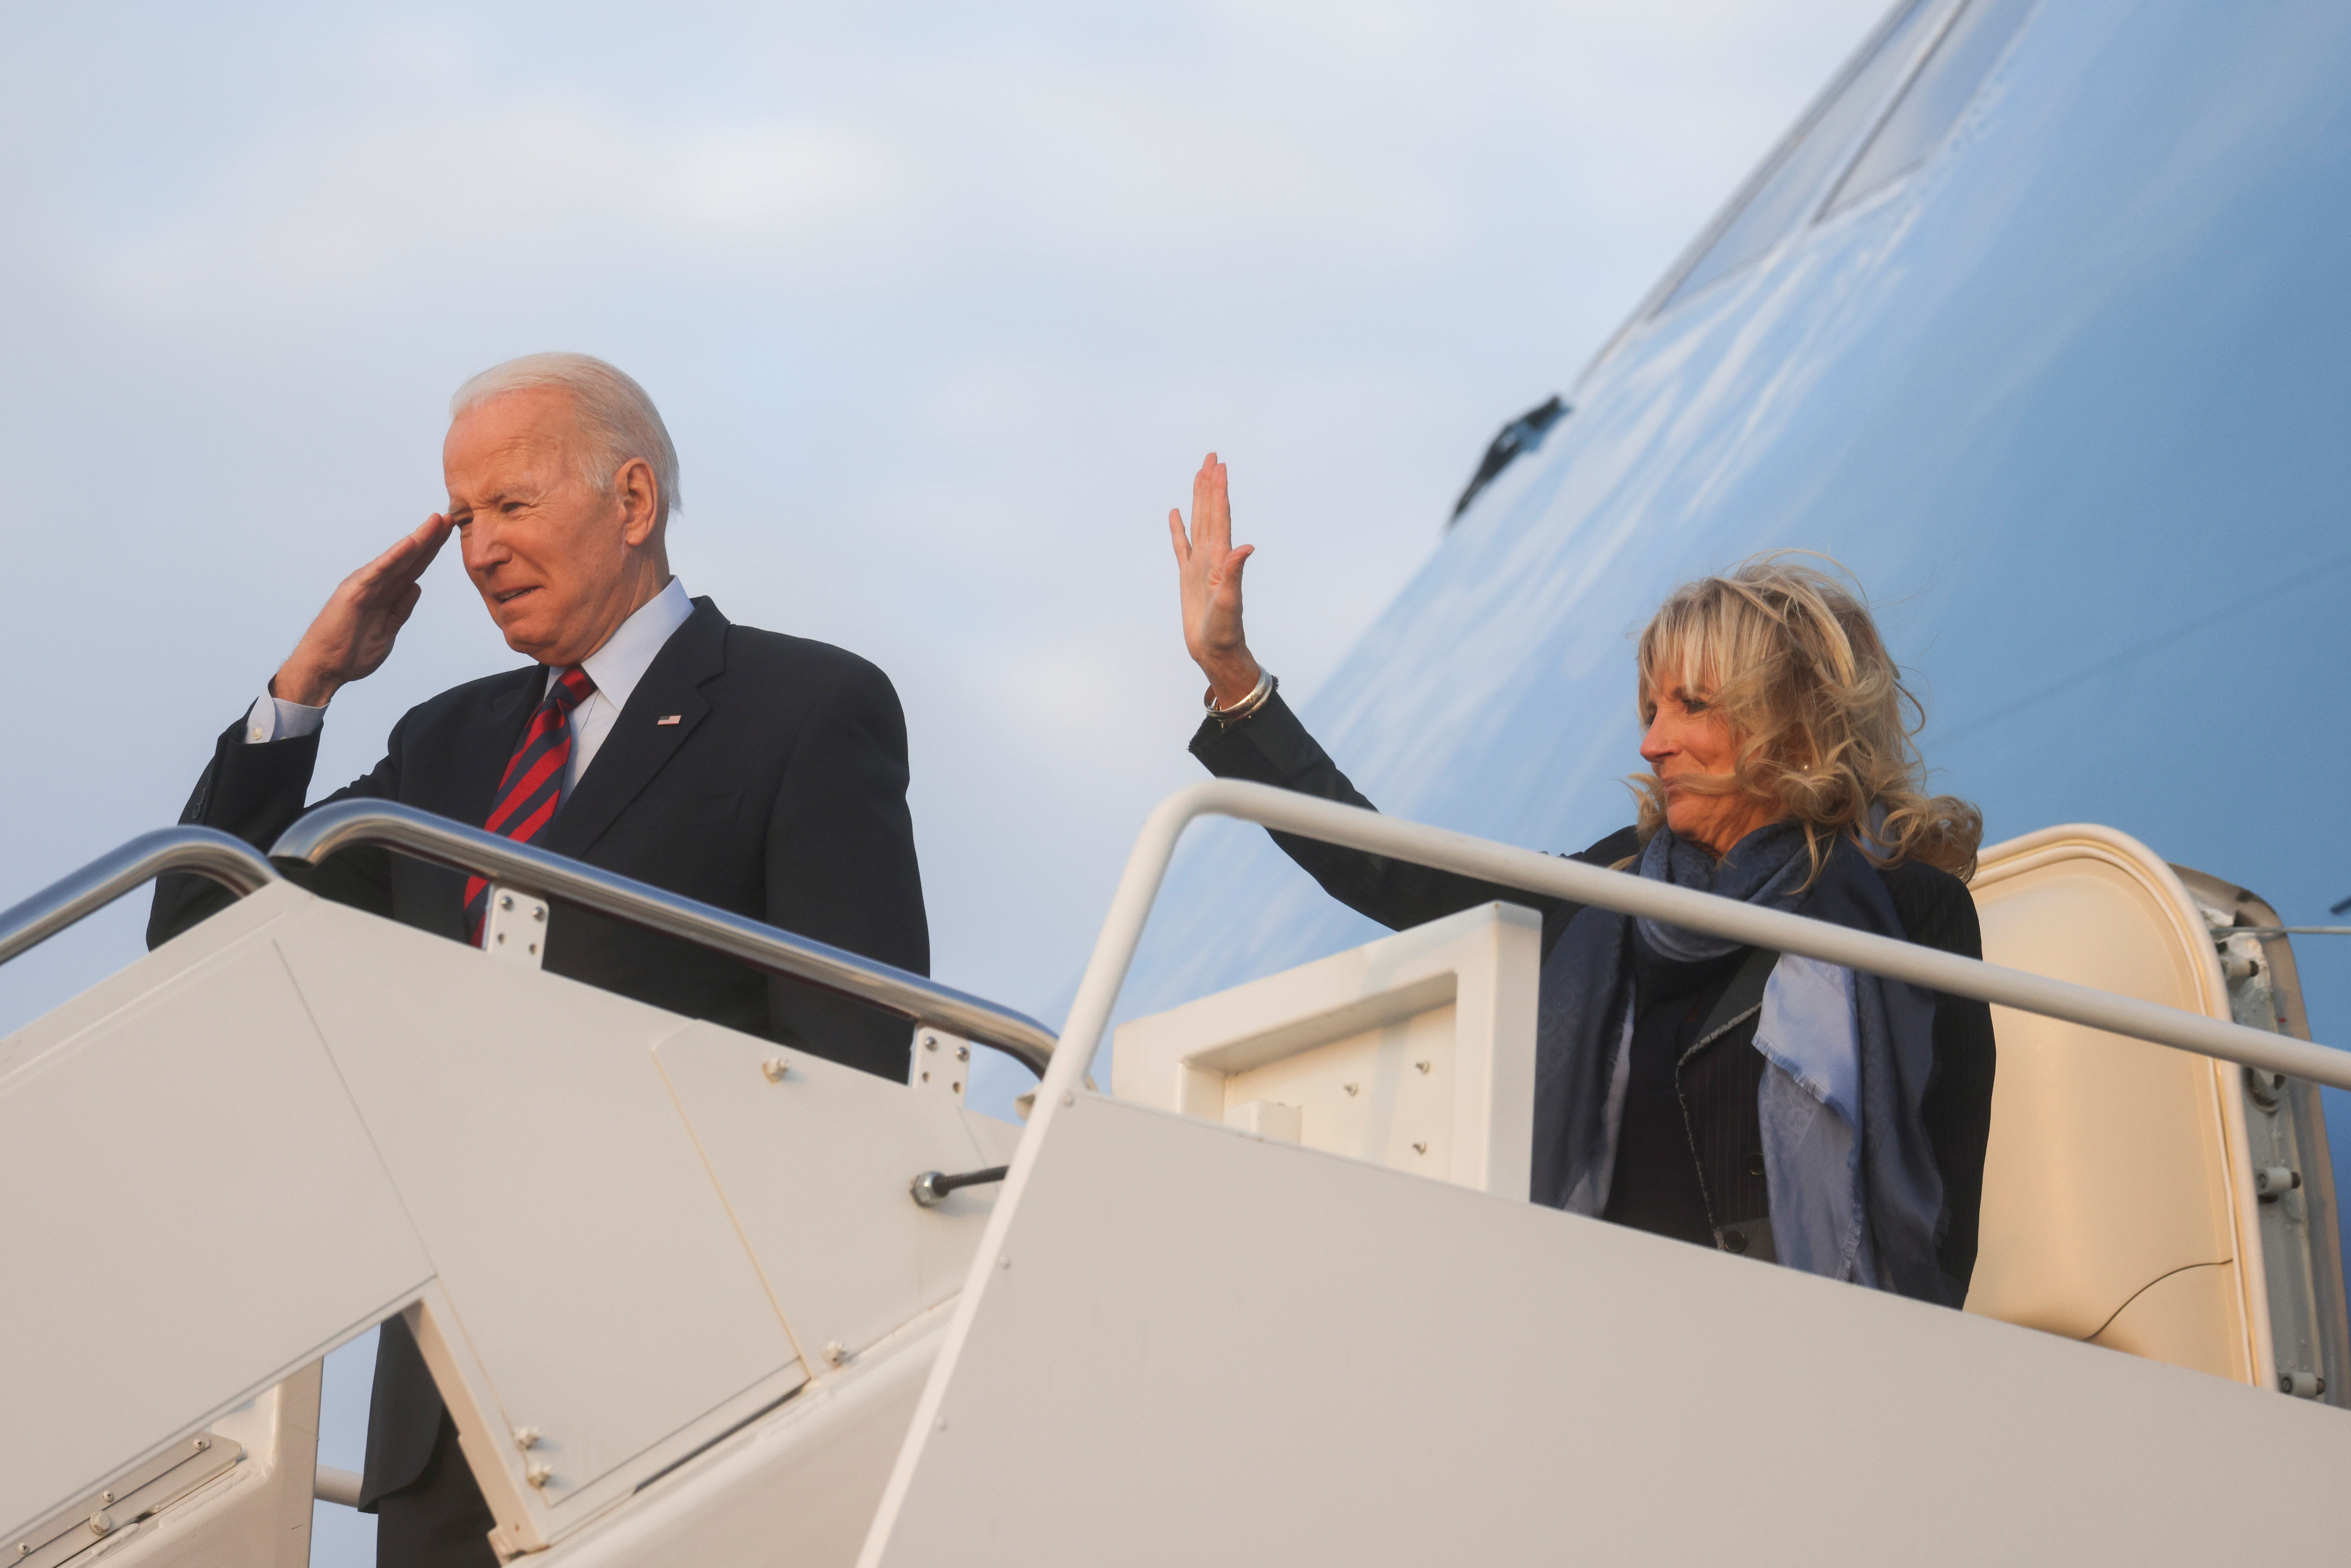 U.S. President Biden and first lady Jill Biden travel to Fort Bragg for Thanksgiving event